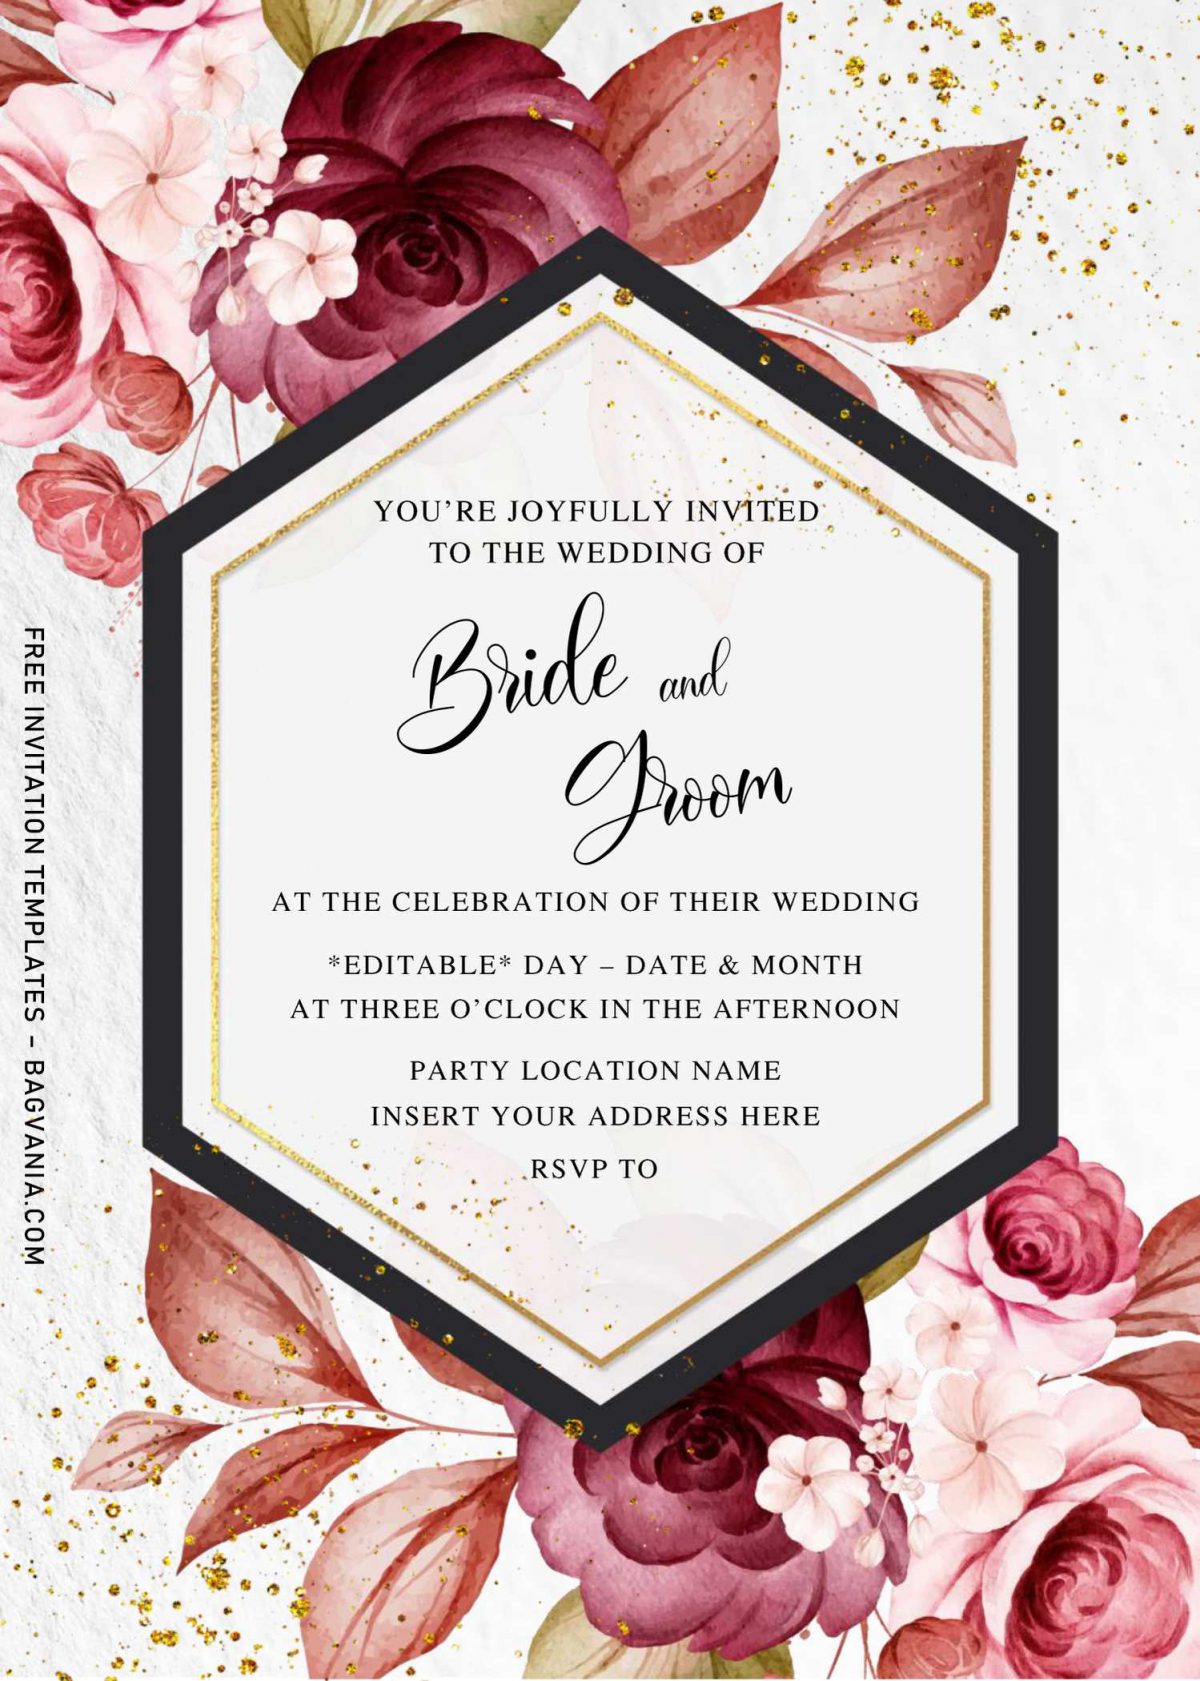 Free Burgundy Floral Wedding Invitation Templates For Word and has watercolor roses